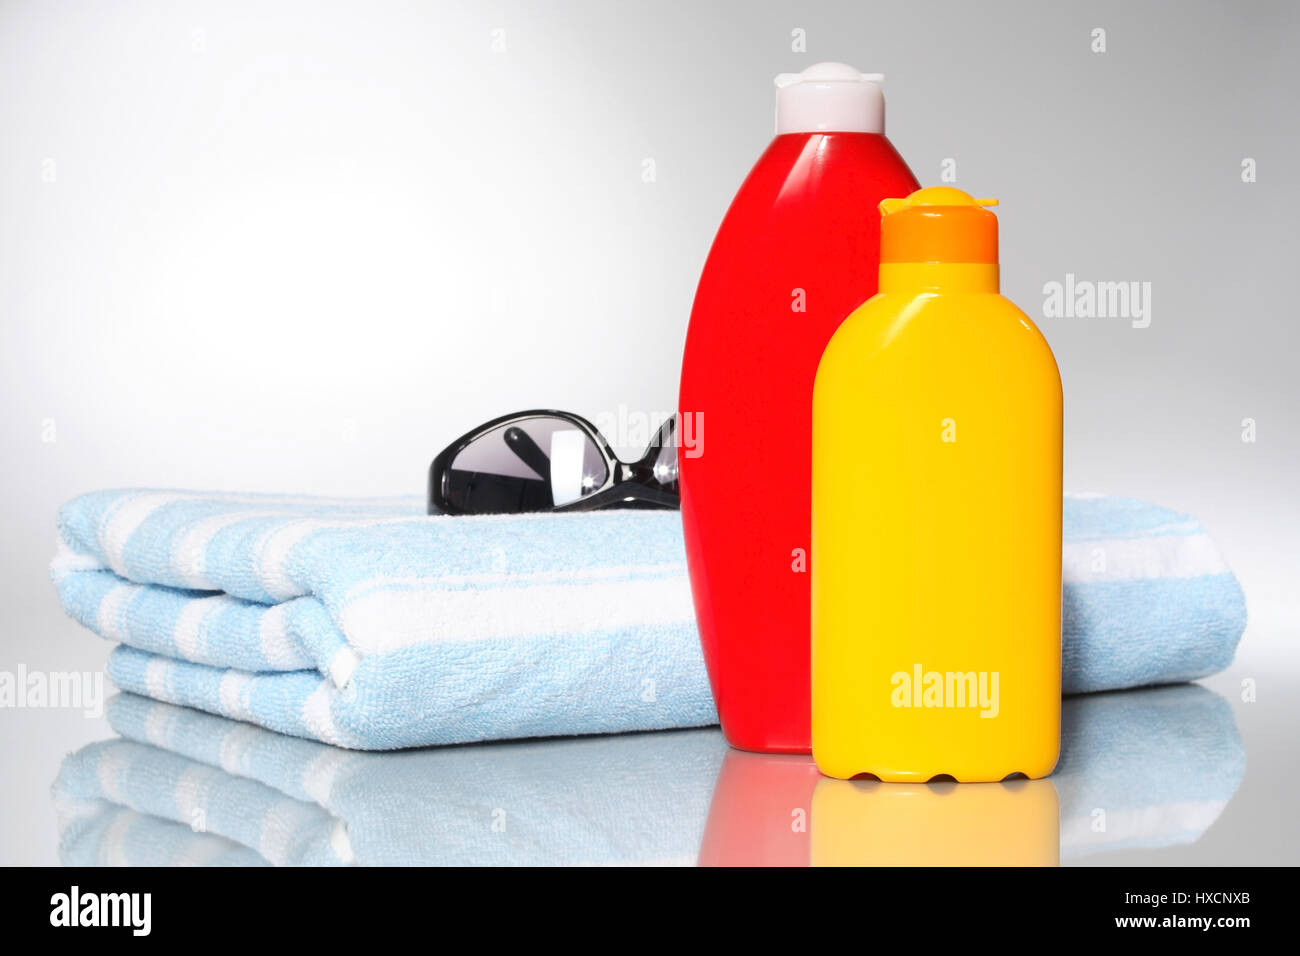 Solar milk, lotion, towel and sunglasses, Sonnenmilch, Lotion, Handtuch und Sonnenbrille Stock Photo